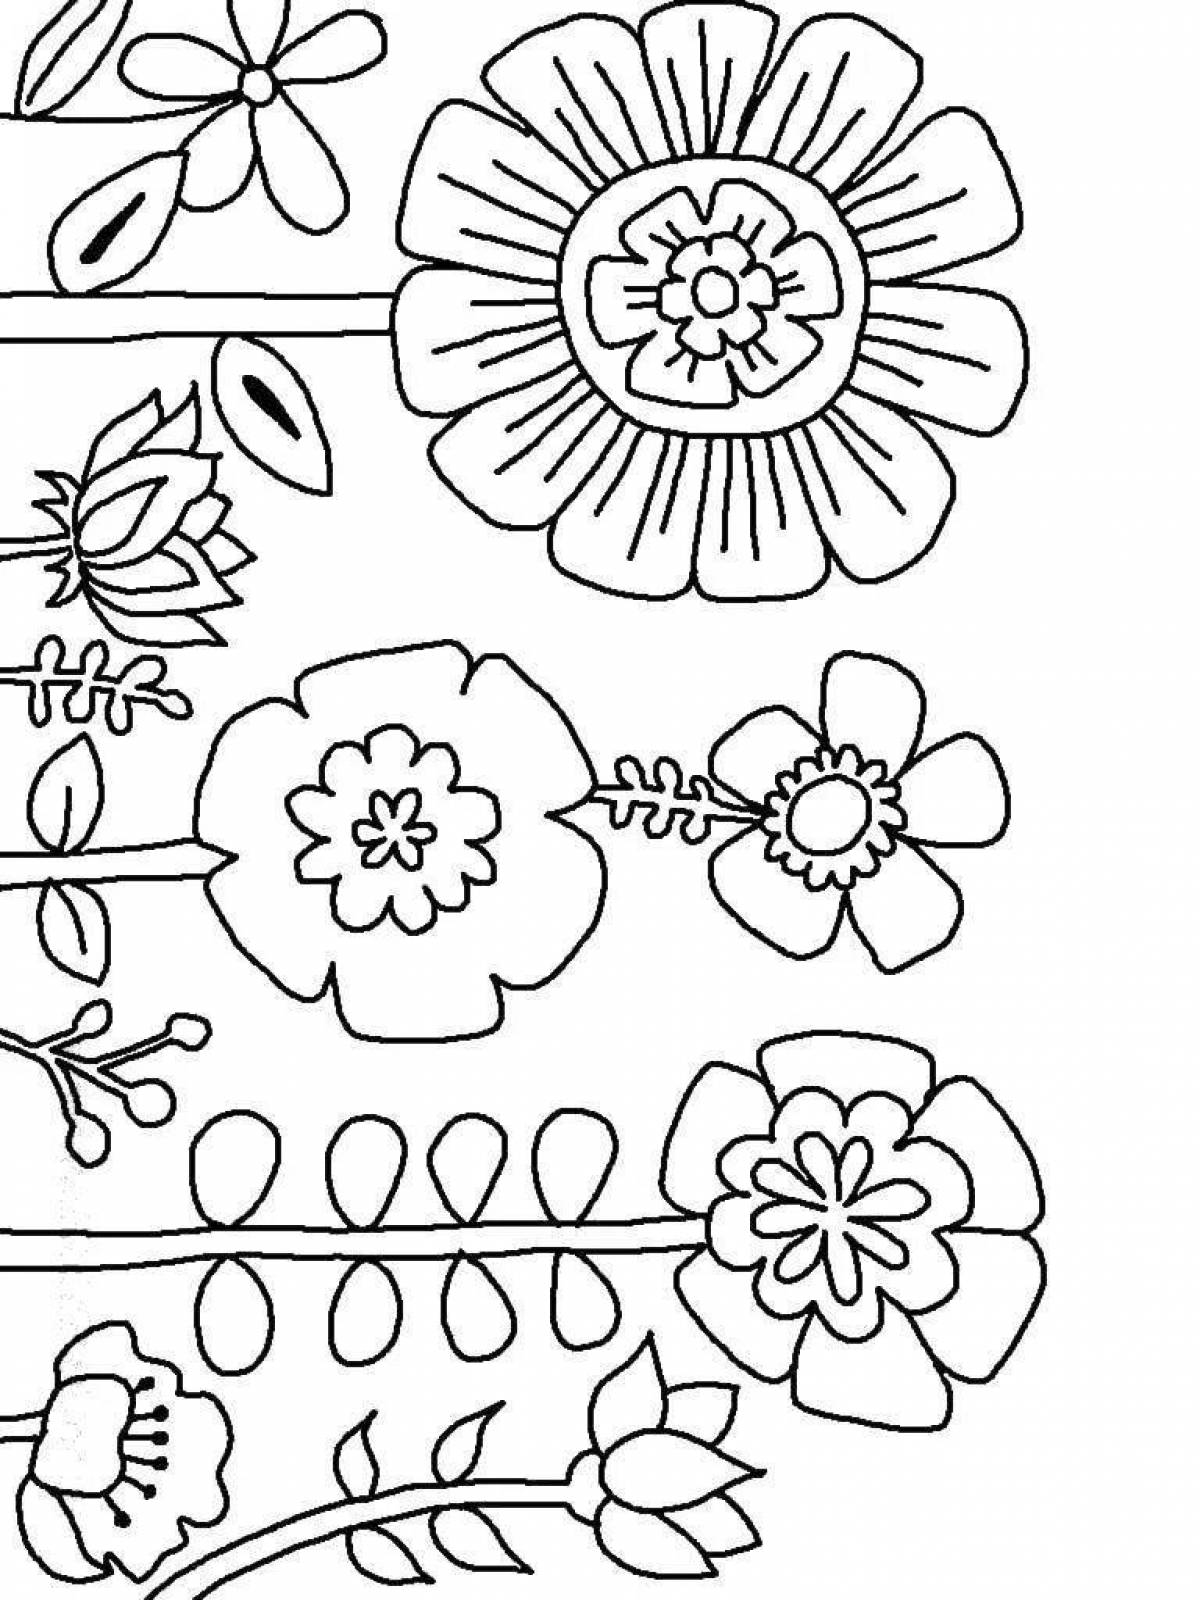 Intricate striped coloring page